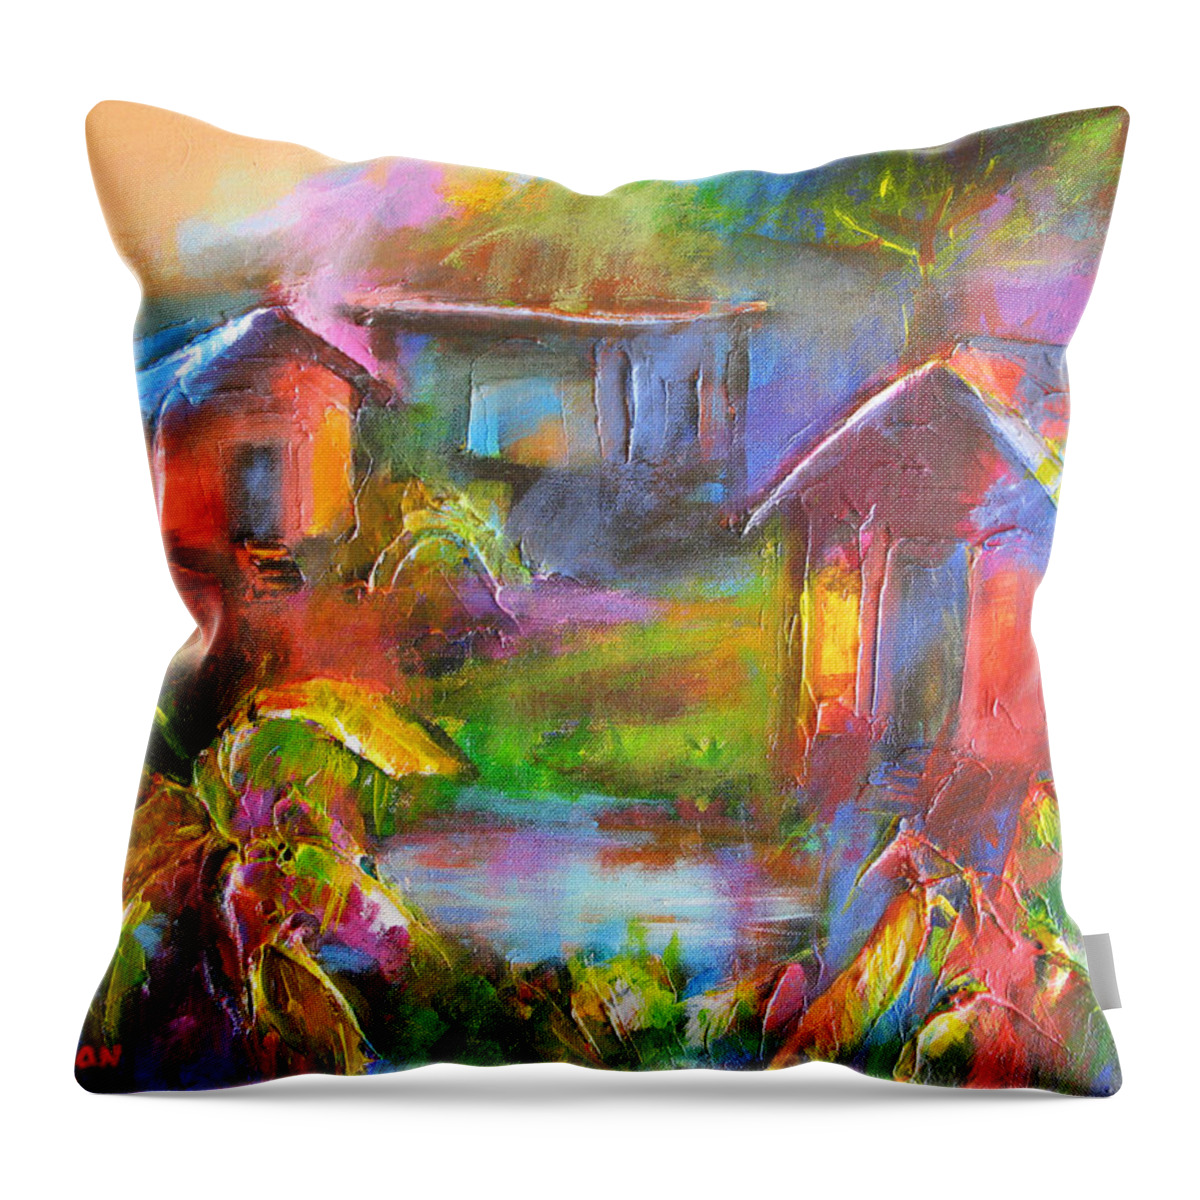 Abstract Throw Pillow featuring the painting Old Houses by Cynthia McLean